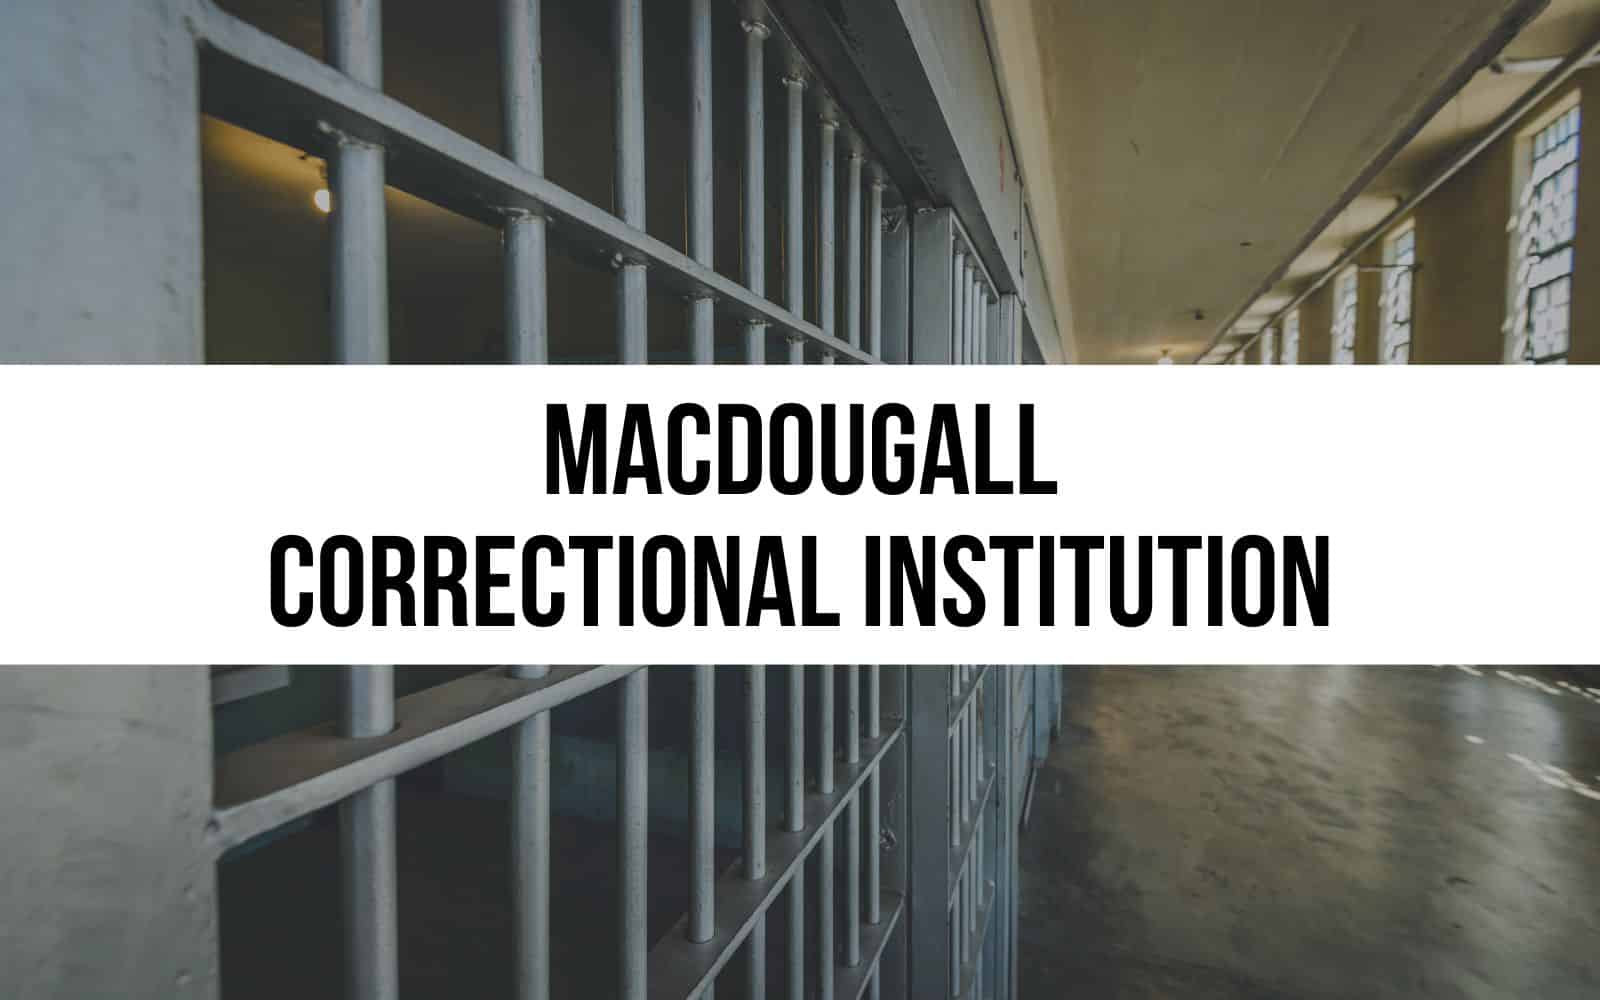 MacDougall Correctional Institution